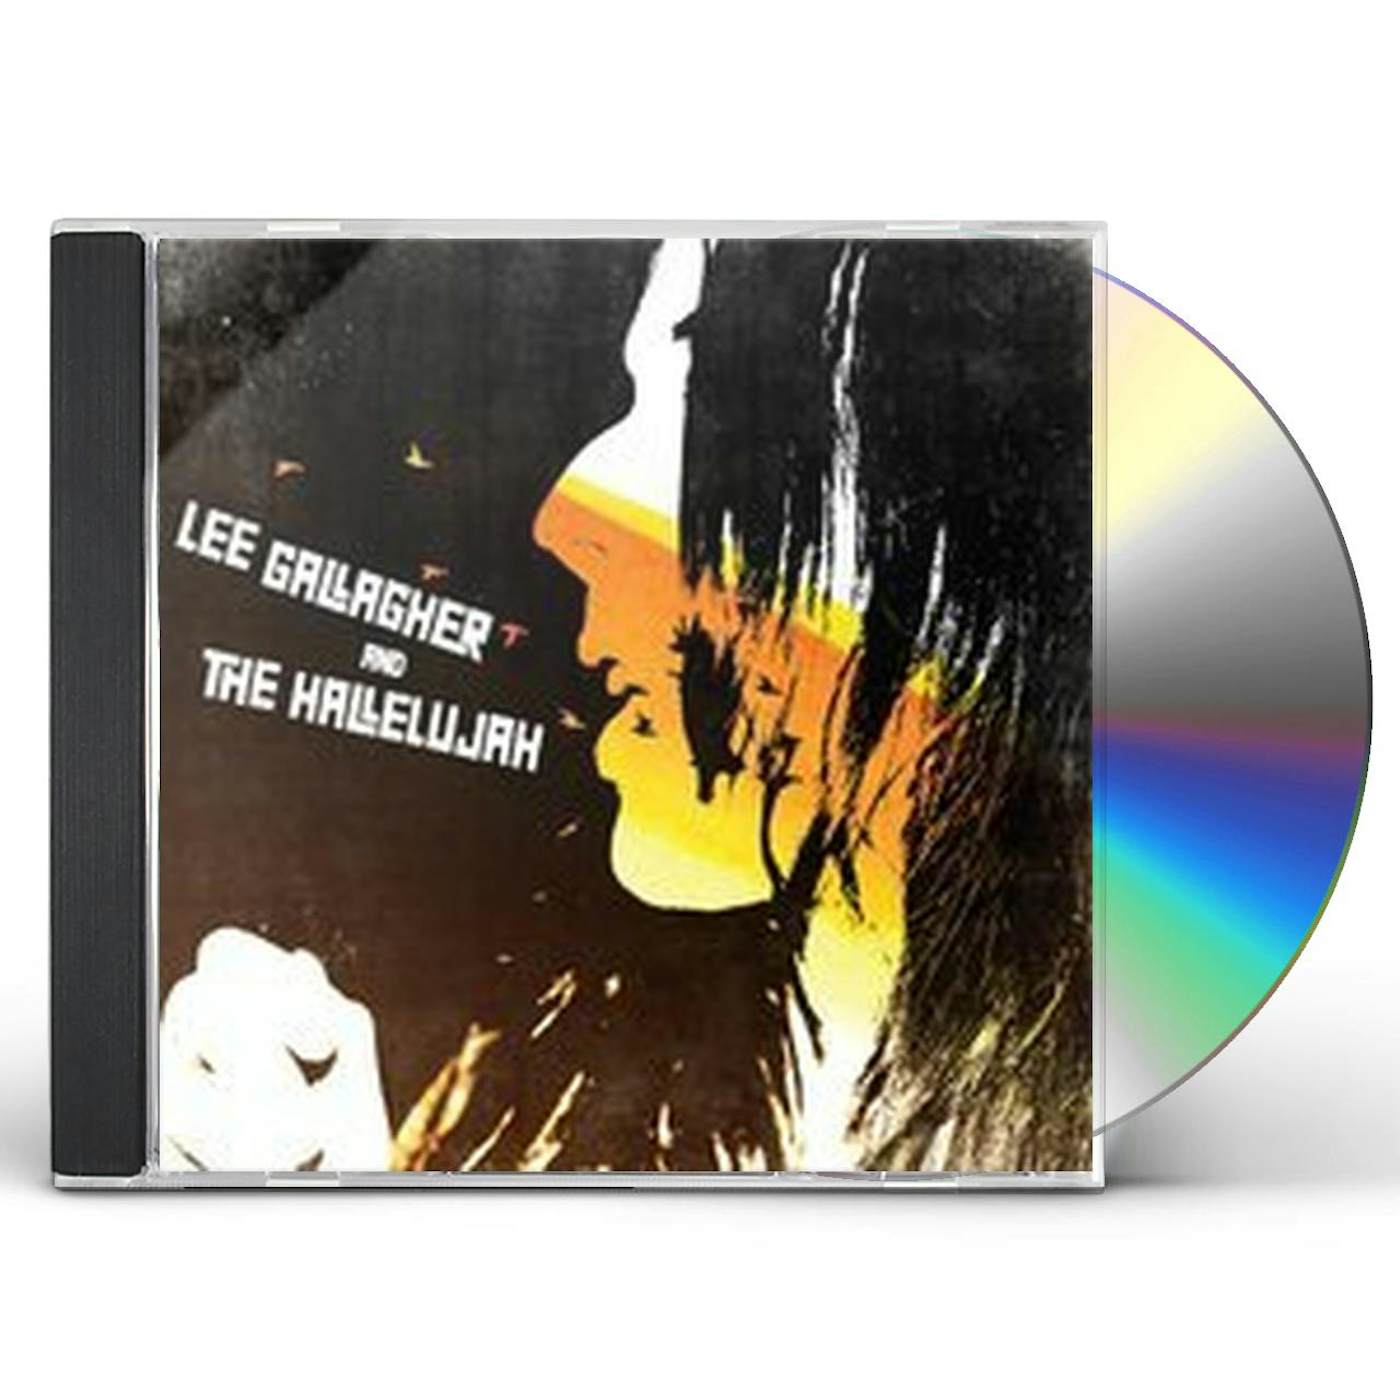 LEE GALLAGHER AND THE HALLELUJAH CD